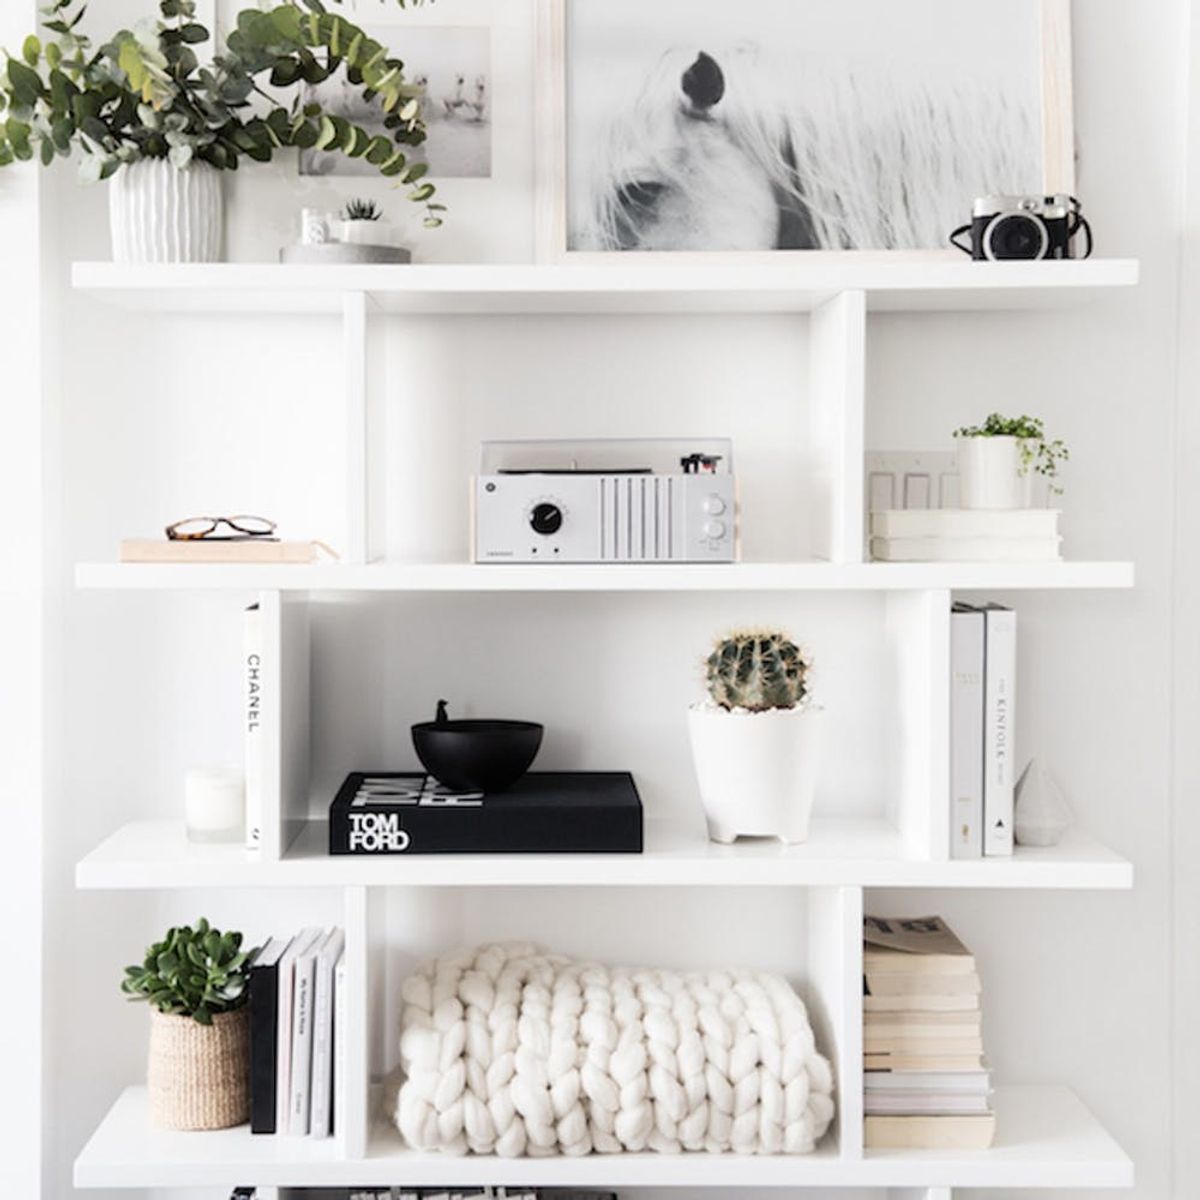 These Shelving Solutions Will Add Instant Space to Your Bedroom